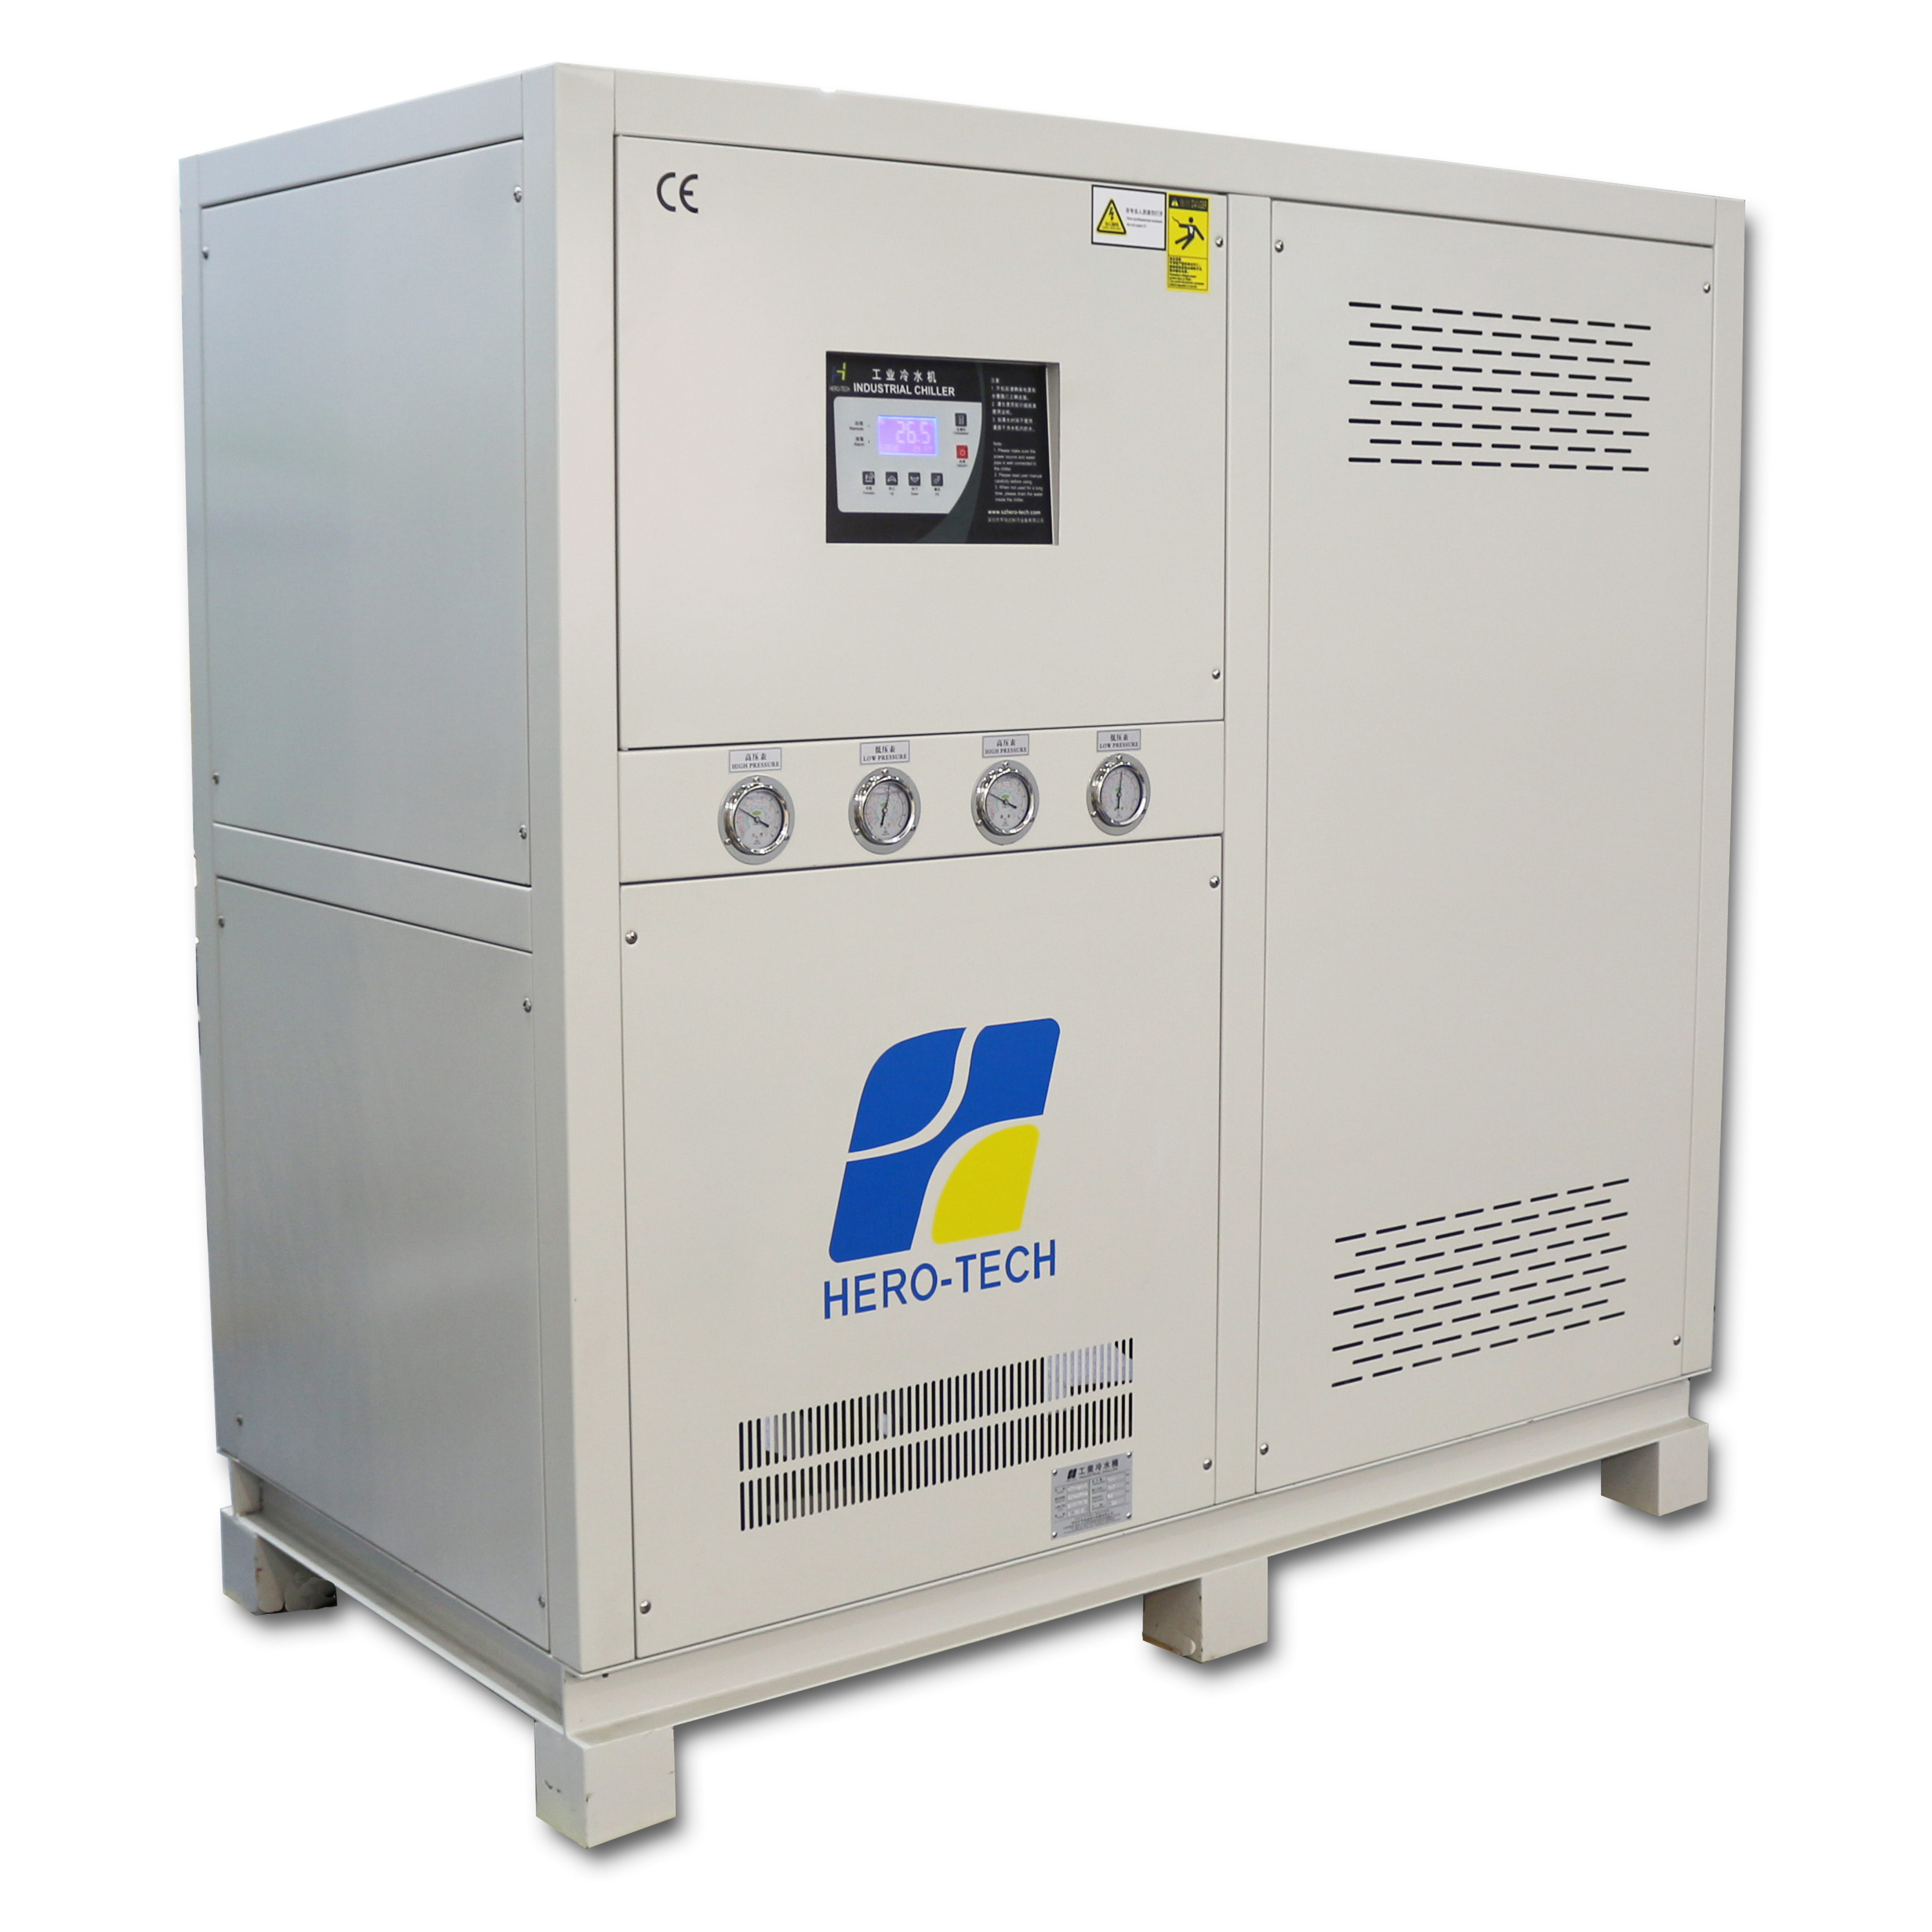 Water cooled industrial chiller Featured Image